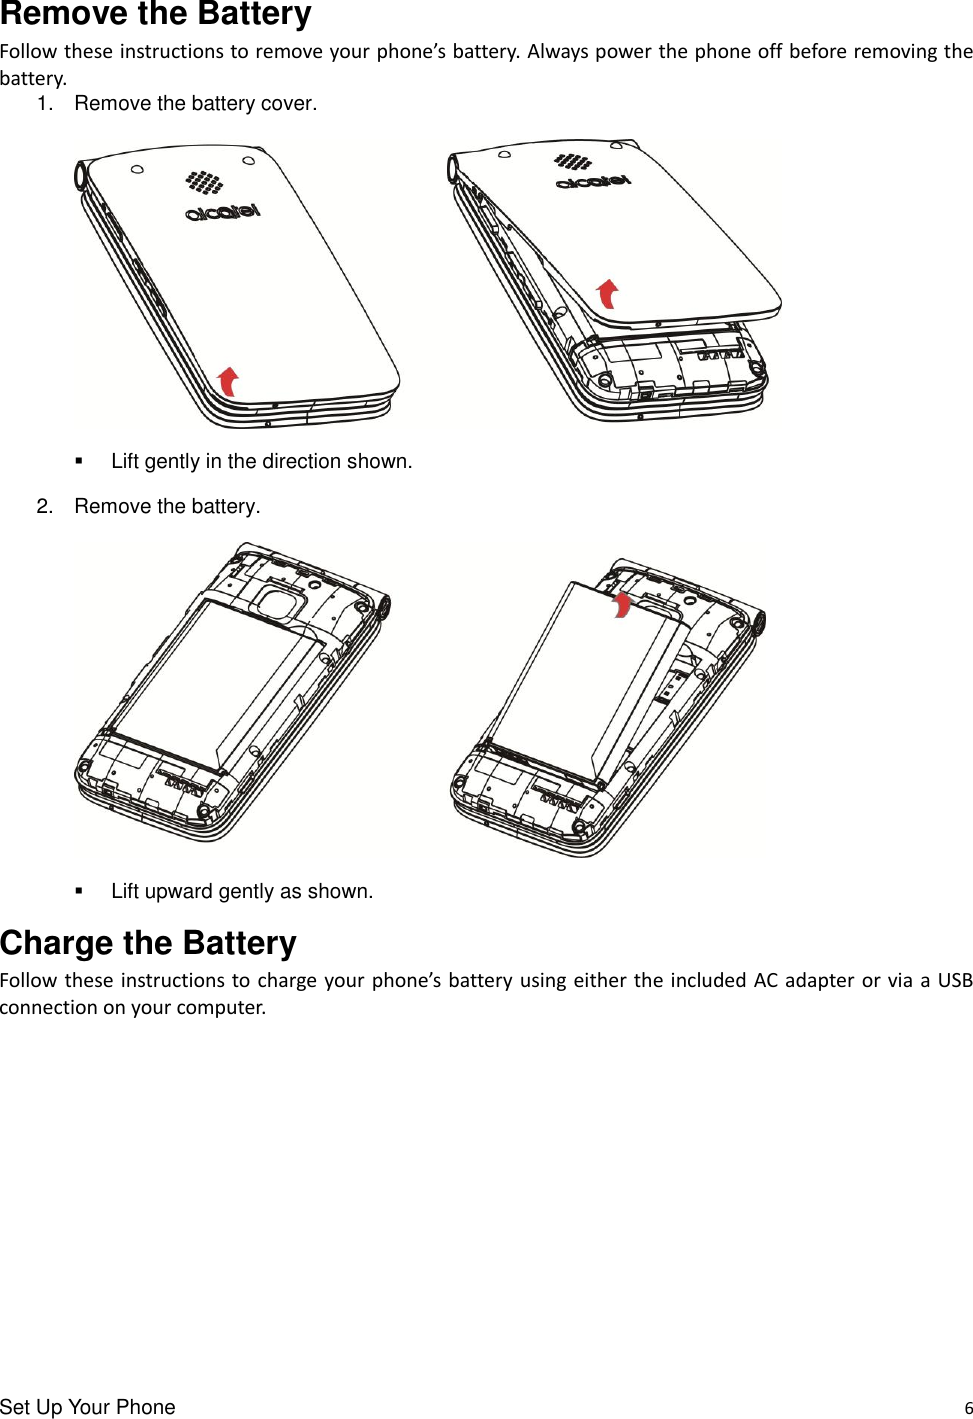 Set Up Your Phone    6 Remove the Battery Follow these instructions to remove your phone’s battery. Always power the phone off before removing the battery. 1.  Remove the battery cover.     Lift gently in the direction shown. 2.  Remove the battery.        Lift upward gently as shown. Charge the Battery Follow these instructions to charge your phone’s battery using either the included AC adapter or via a USB connection on your computer. 